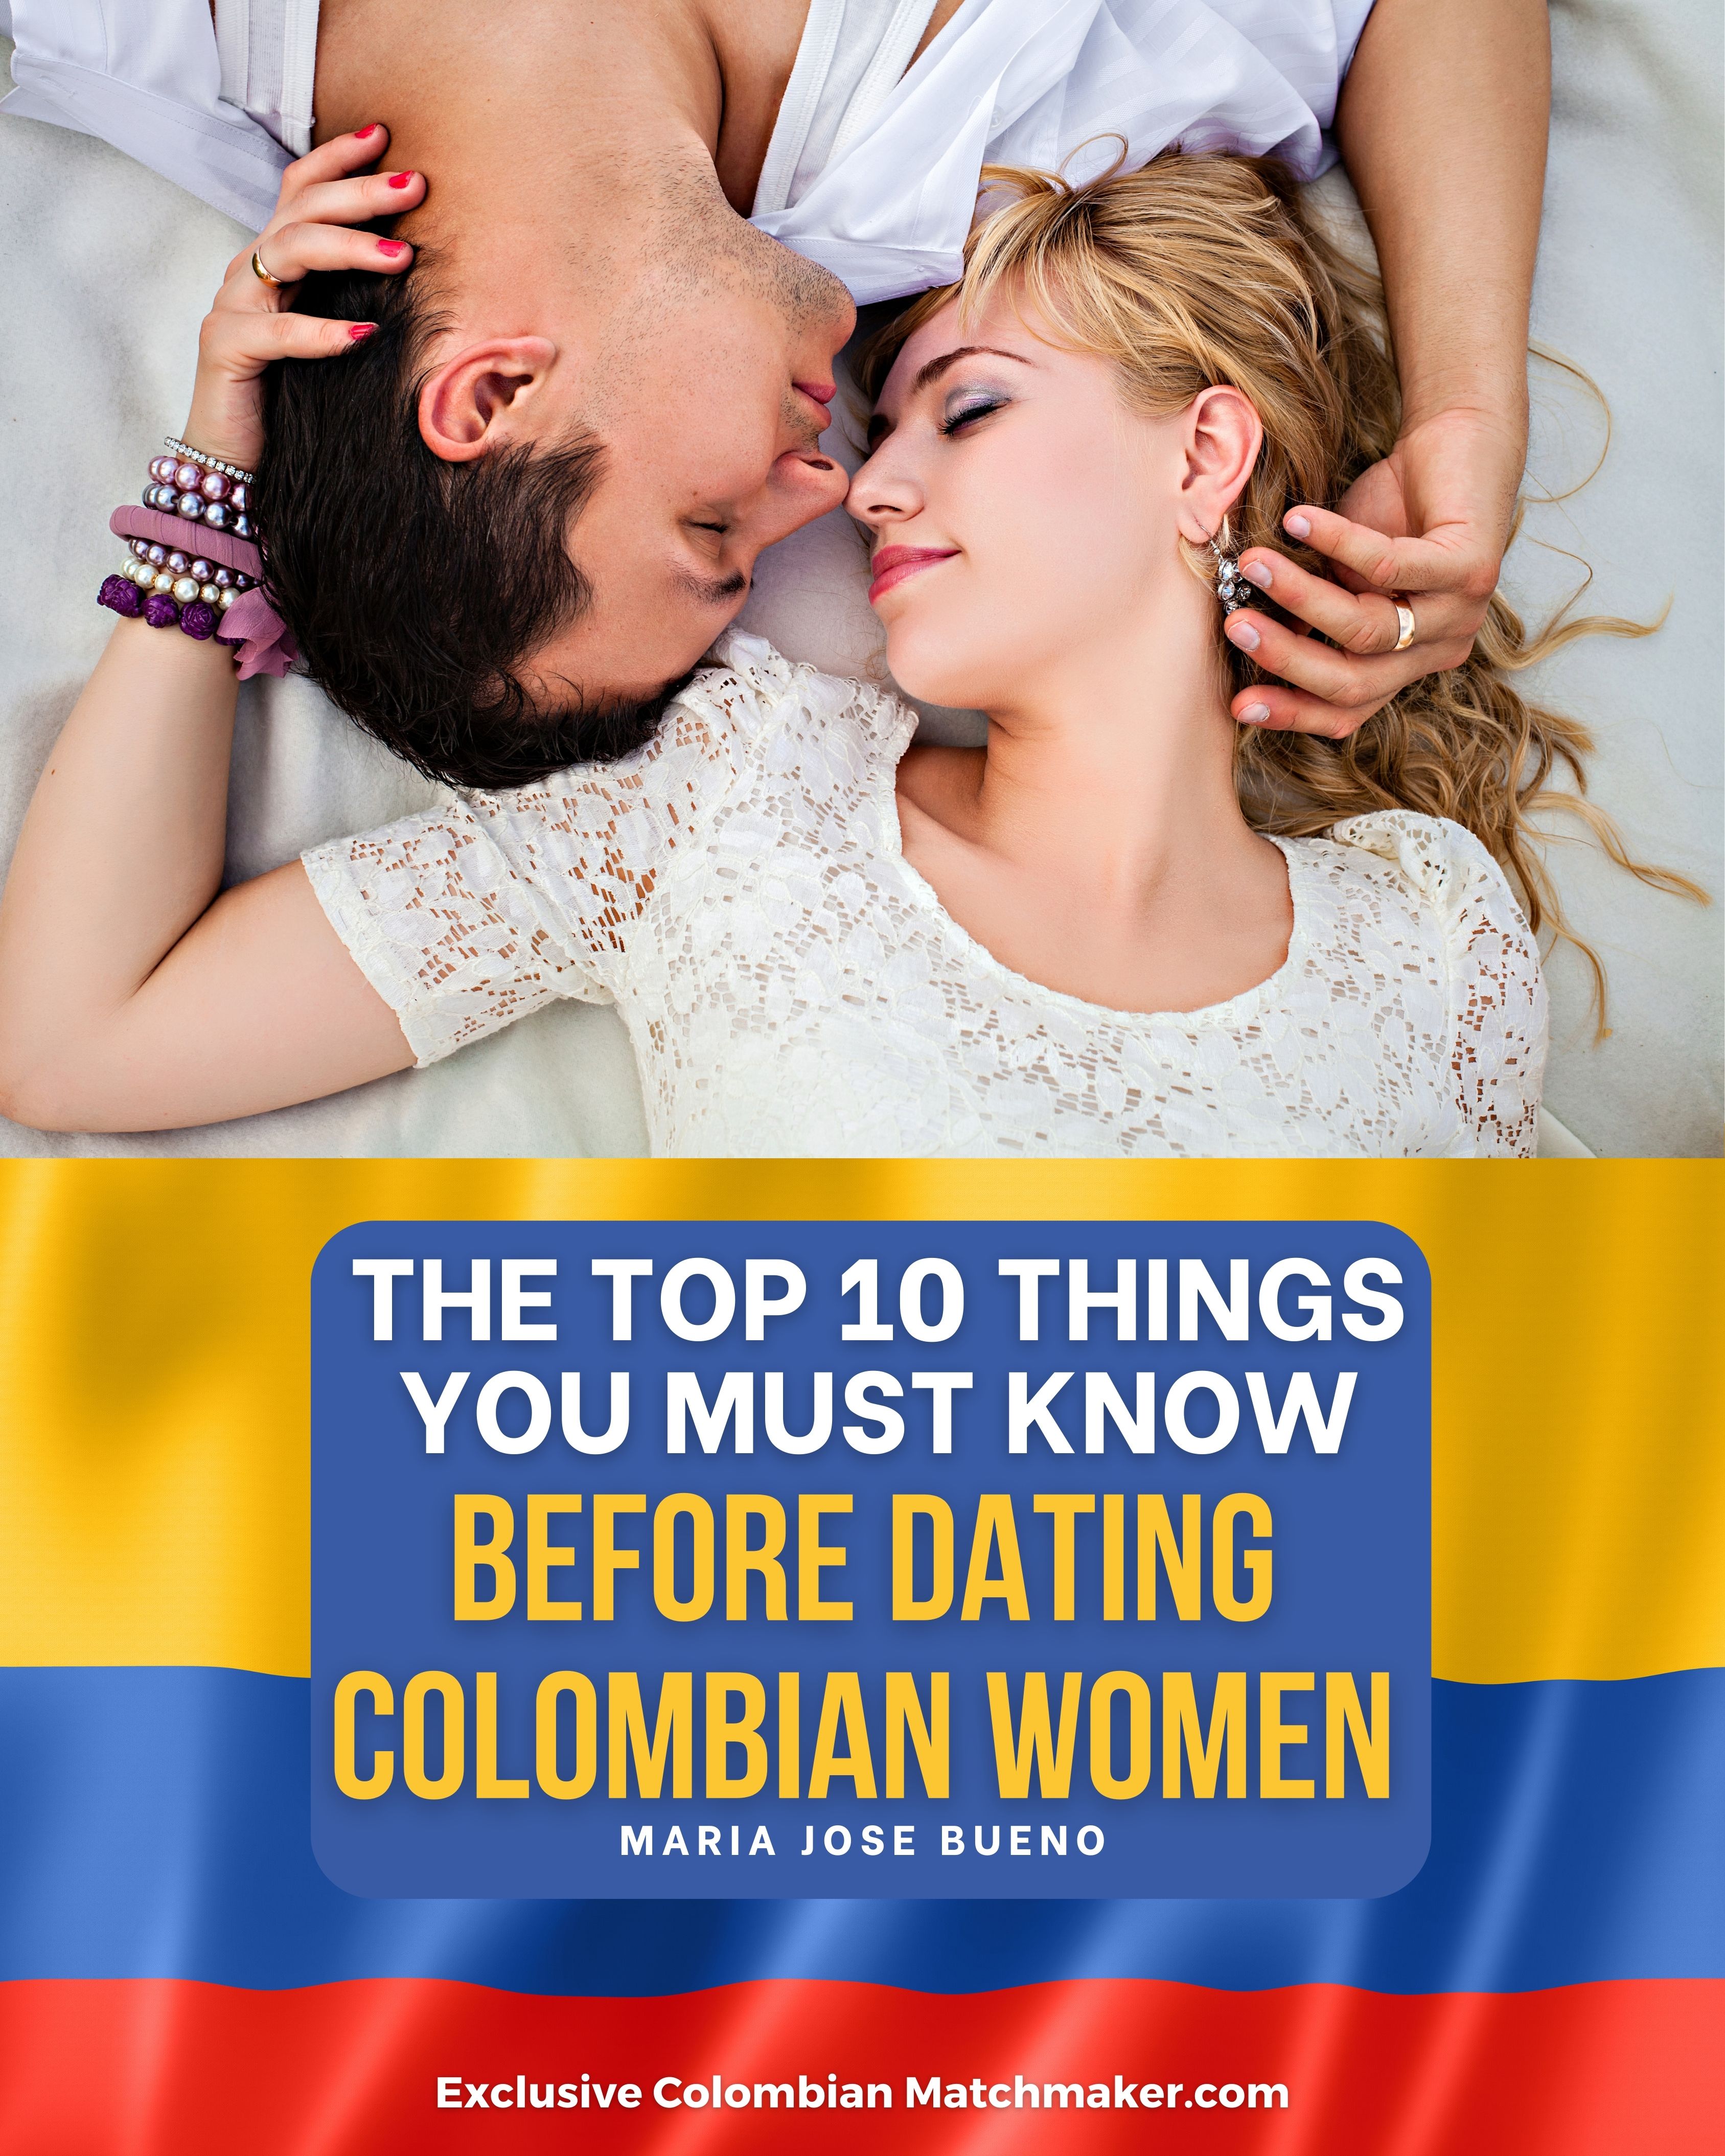 Colombian Professional Matchmaker, Matchmaking Service, Marriage Agency,